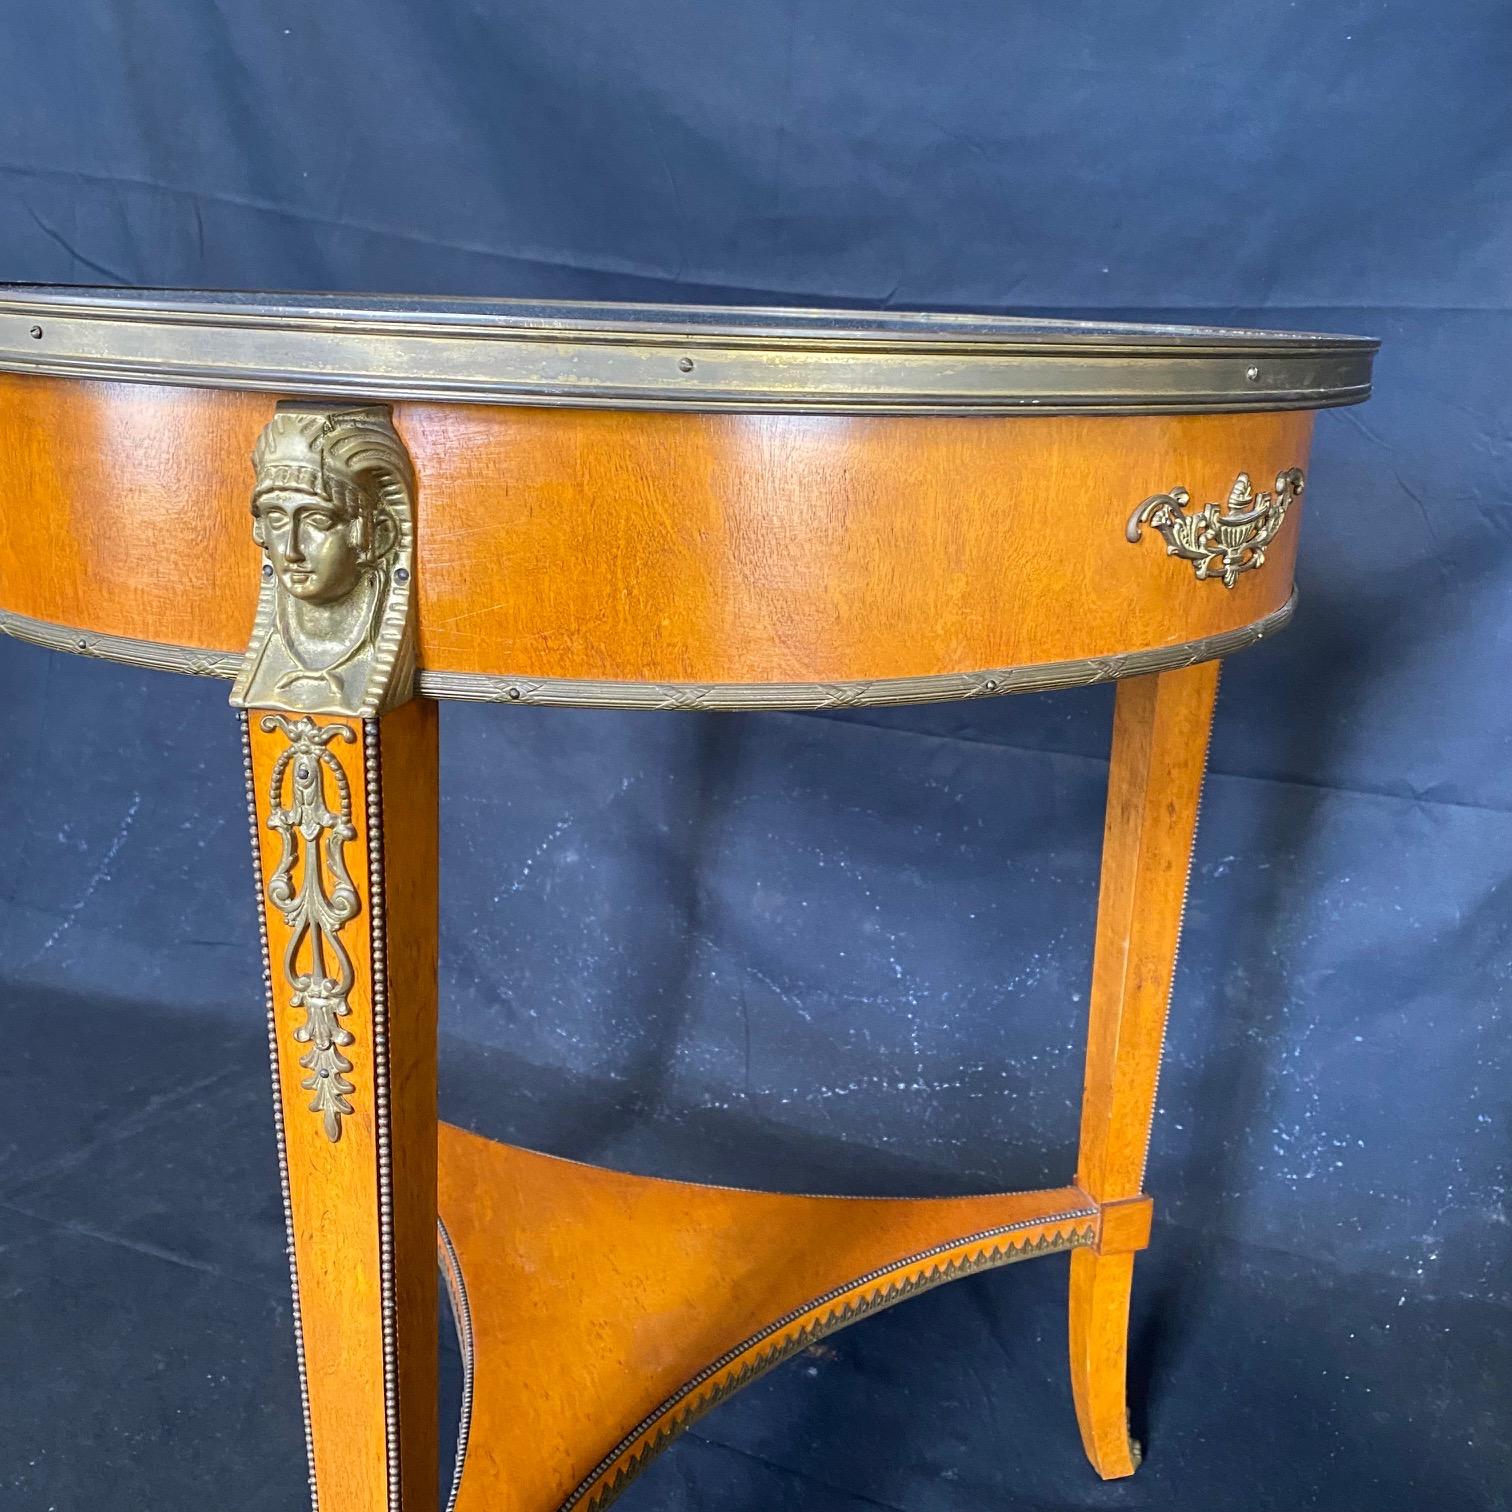 Lovely details in this French Neoclassical style round side table having beautiful green marble top over tapering legs capped with bronze jabots.  Figural busts in bronze add to the embellishmensts, and there's beaded trim as well as fretwork on the